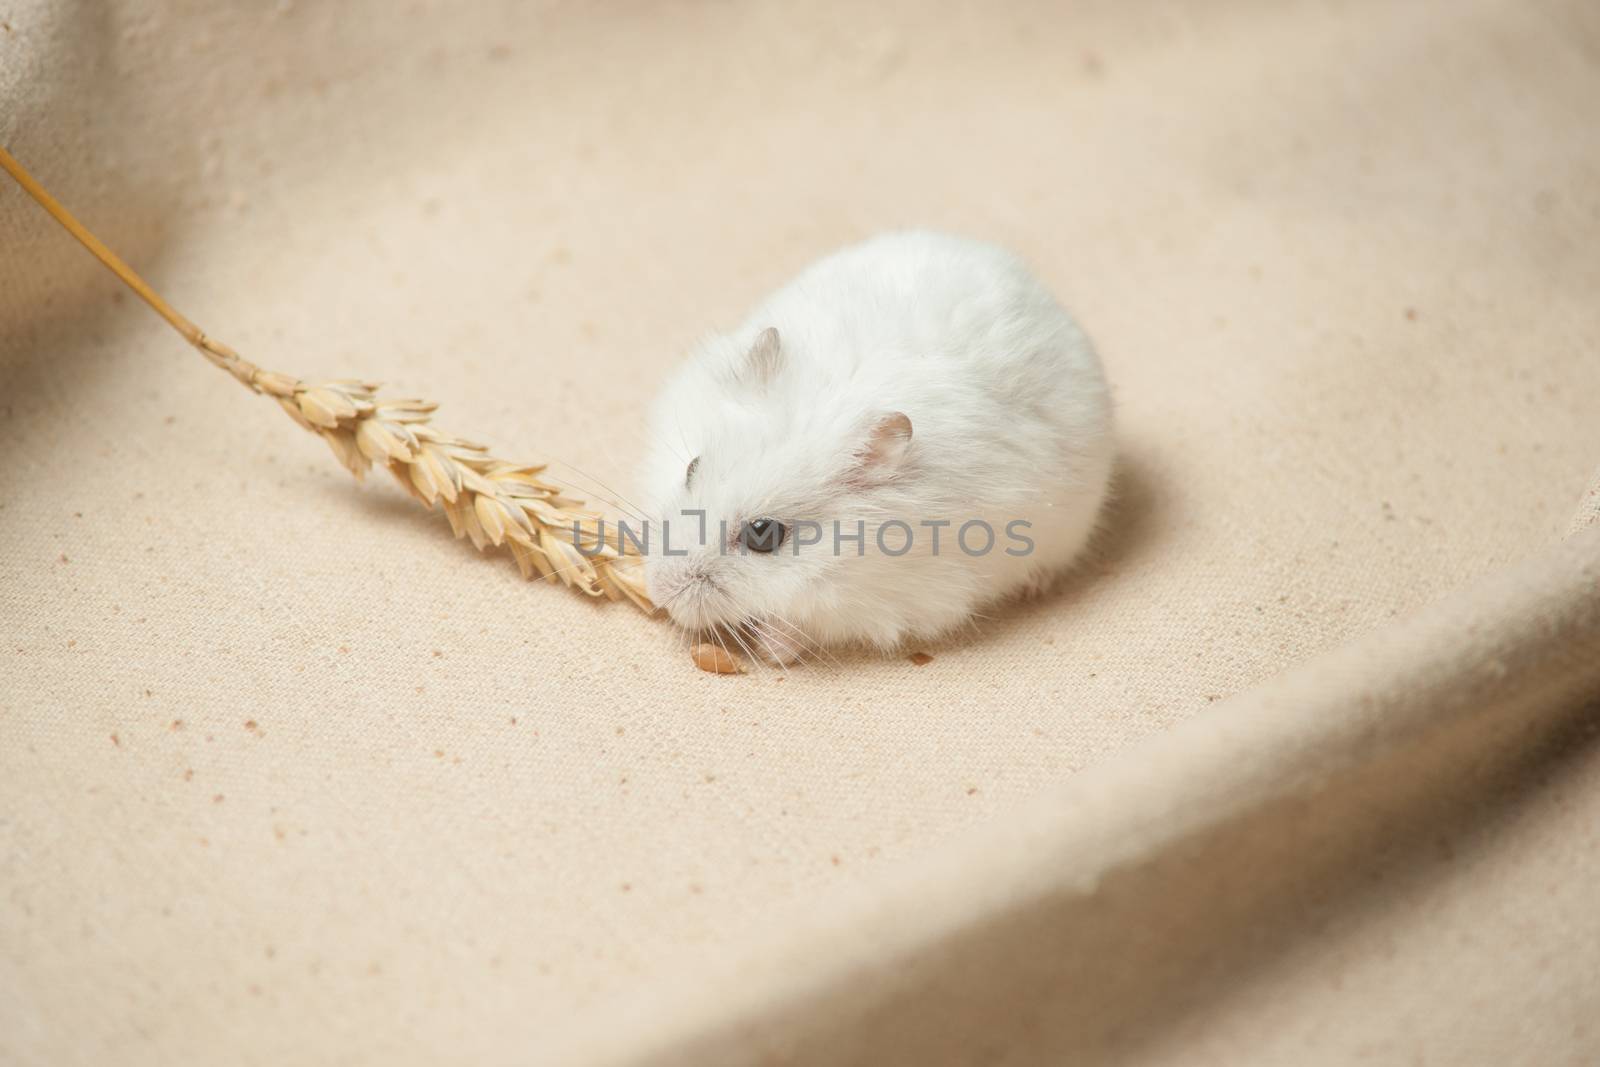 The small hamster eat a seed on sackcloth